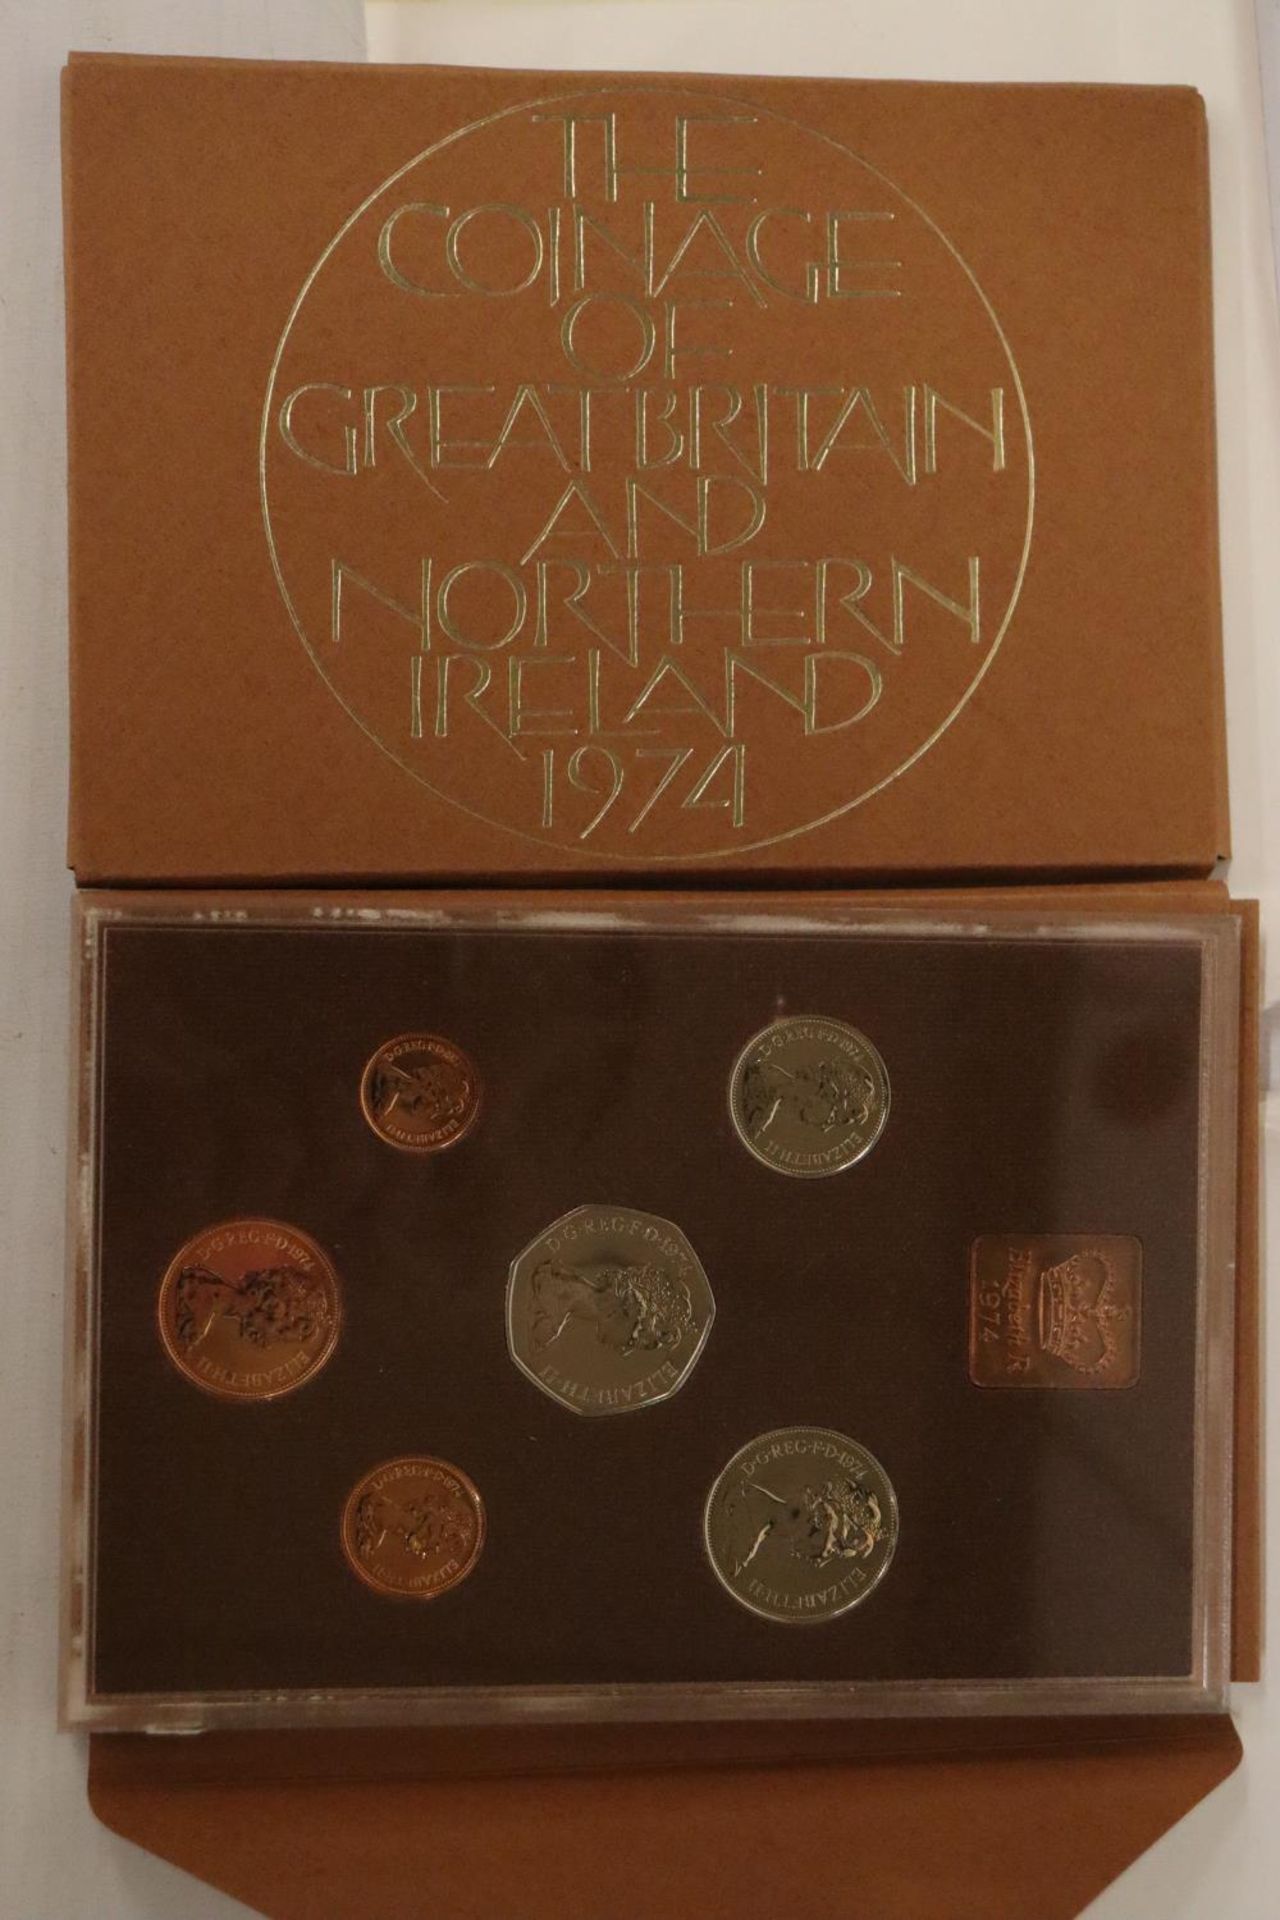 UK & NI , 2 X 1972, 2 X’73, 2 X ’74 AND 2 X ’75 YEAR PACKS OF COINS CONTAINED IN ENVELOPE - Image 3 of 5